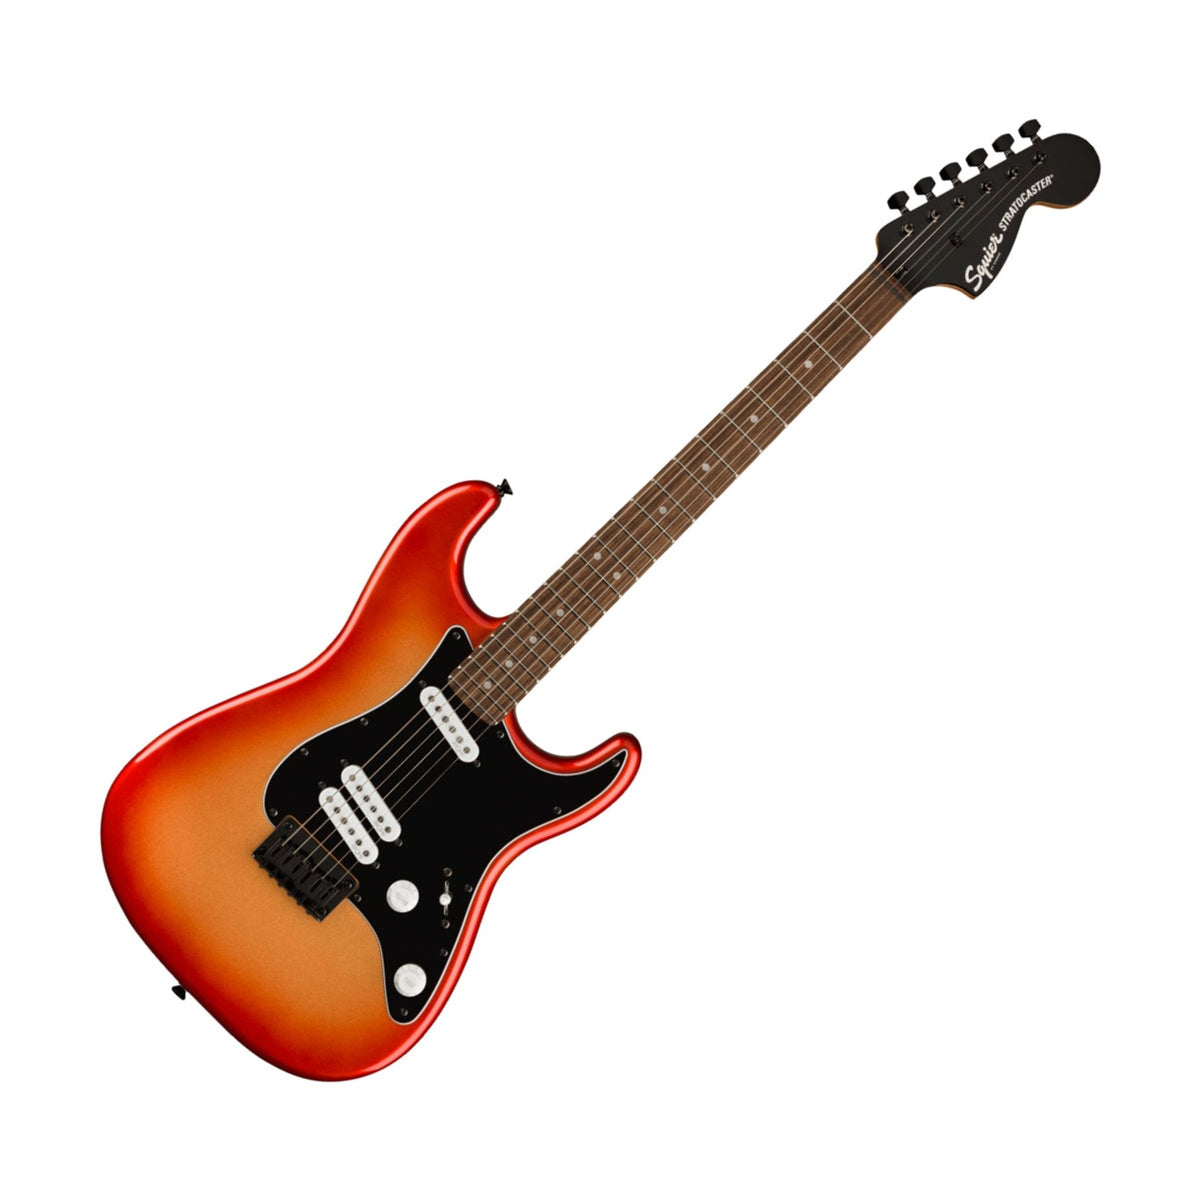 Fender Squier Contemporary Stratocaster Special HT brings modern features and bold aesthetics to an iconic Fender platform to satisfy today’s most discerning and daring players.